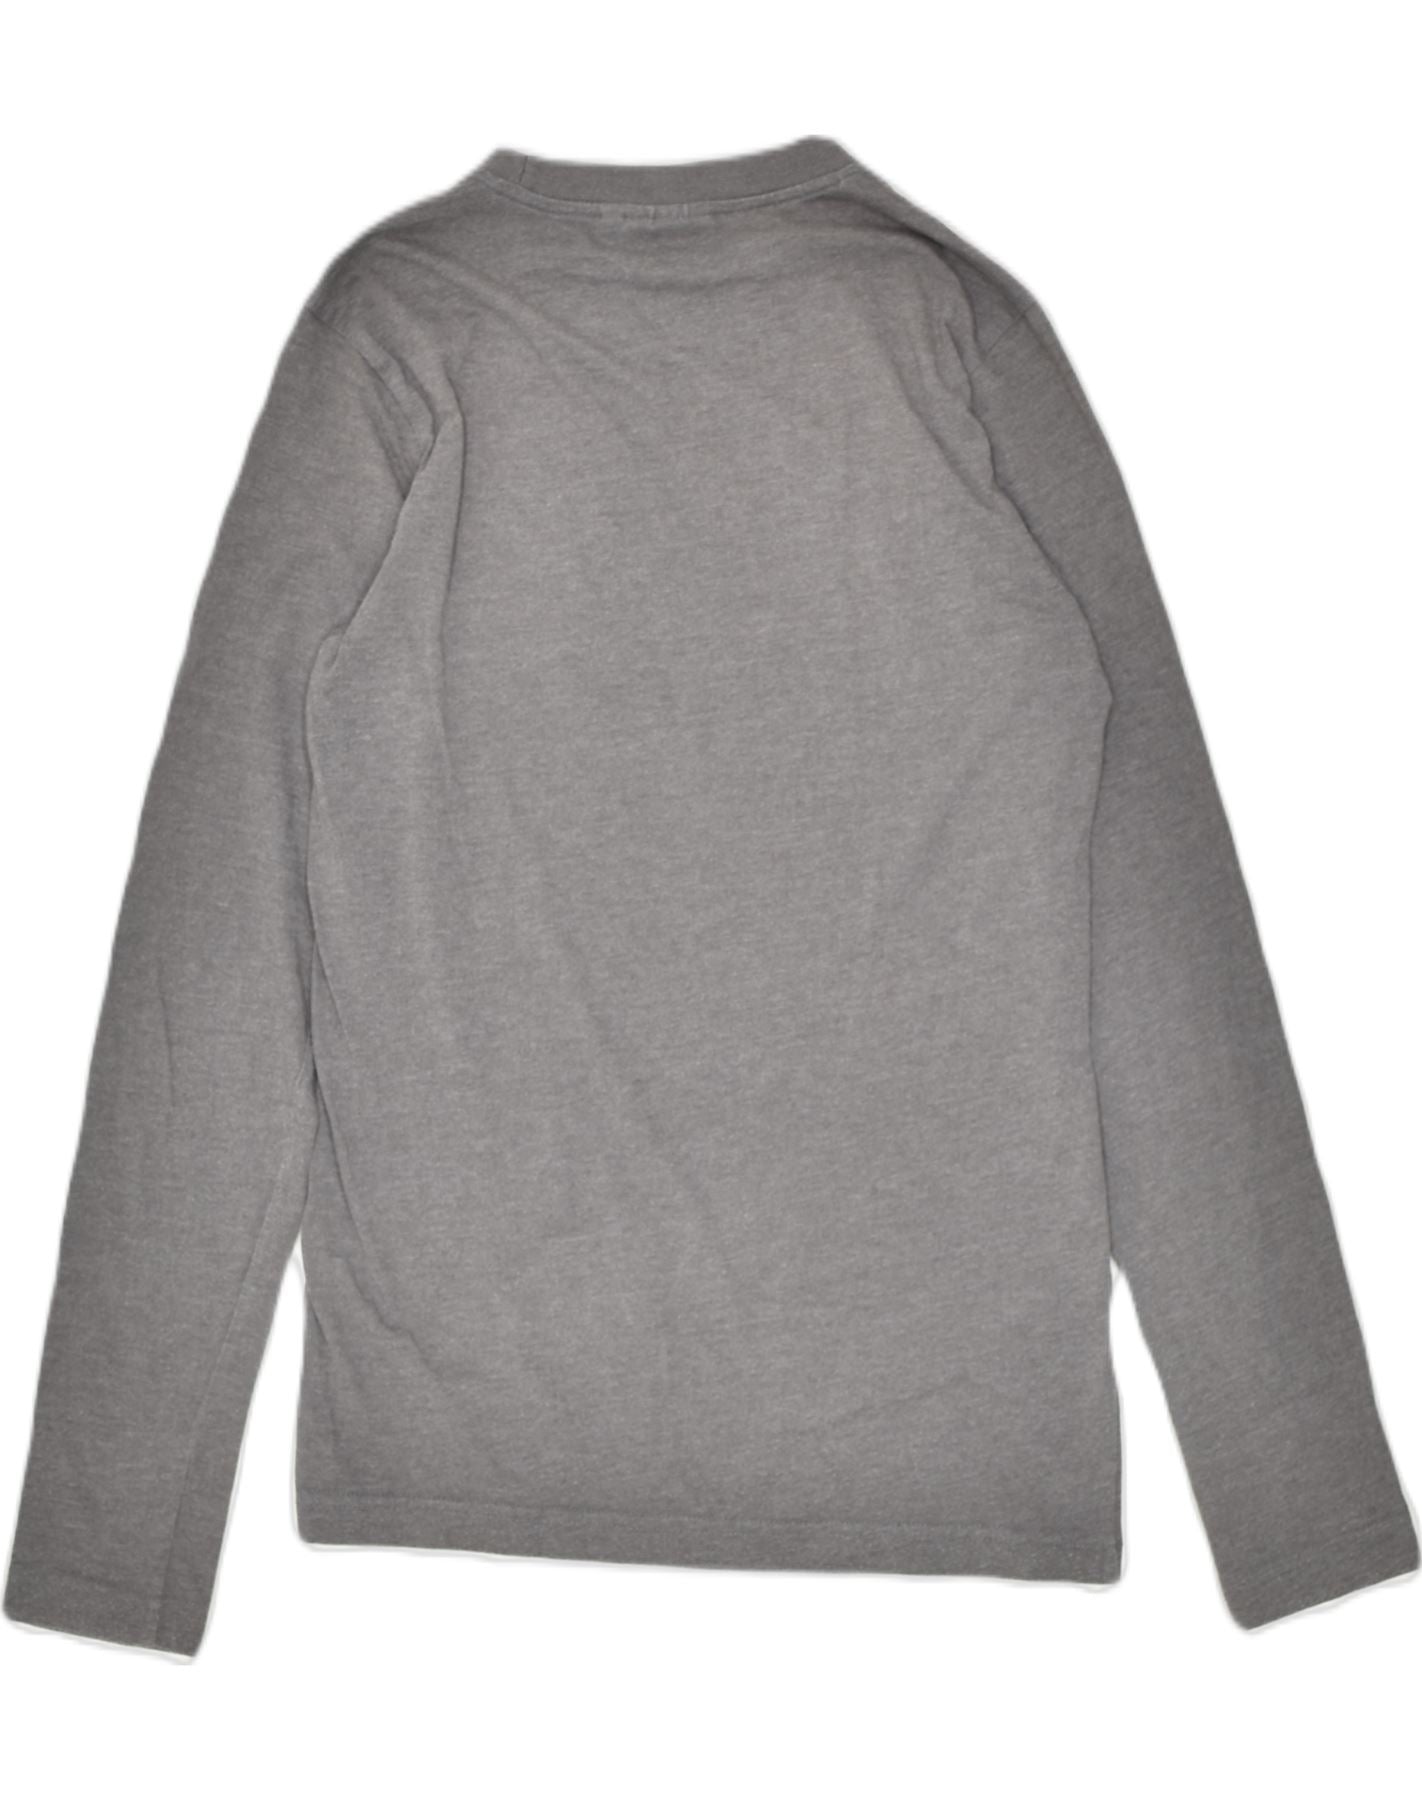  Nautica Men's Long Sleeve Solid Crew Neck T-Shirt (Large, Grey)  : Clothing, Shoes & Jewelry